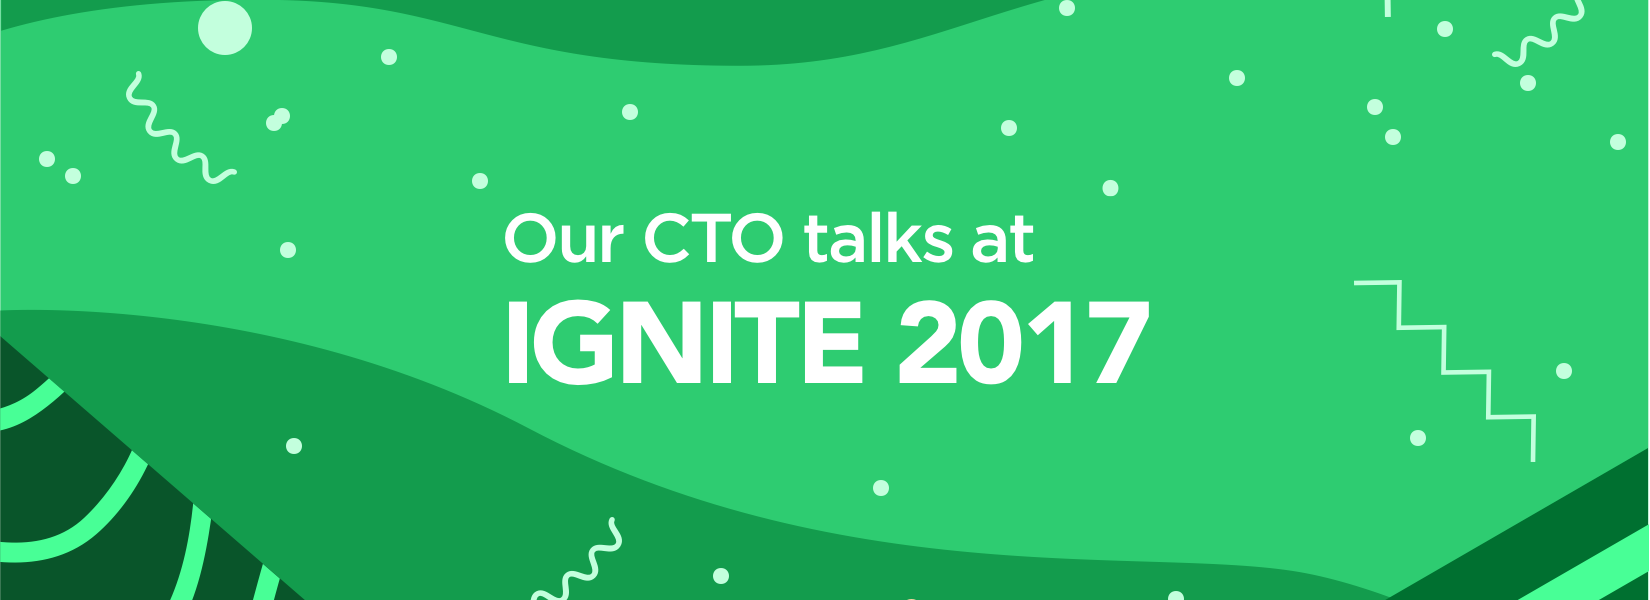 Our CTO talks at Ignite 2017